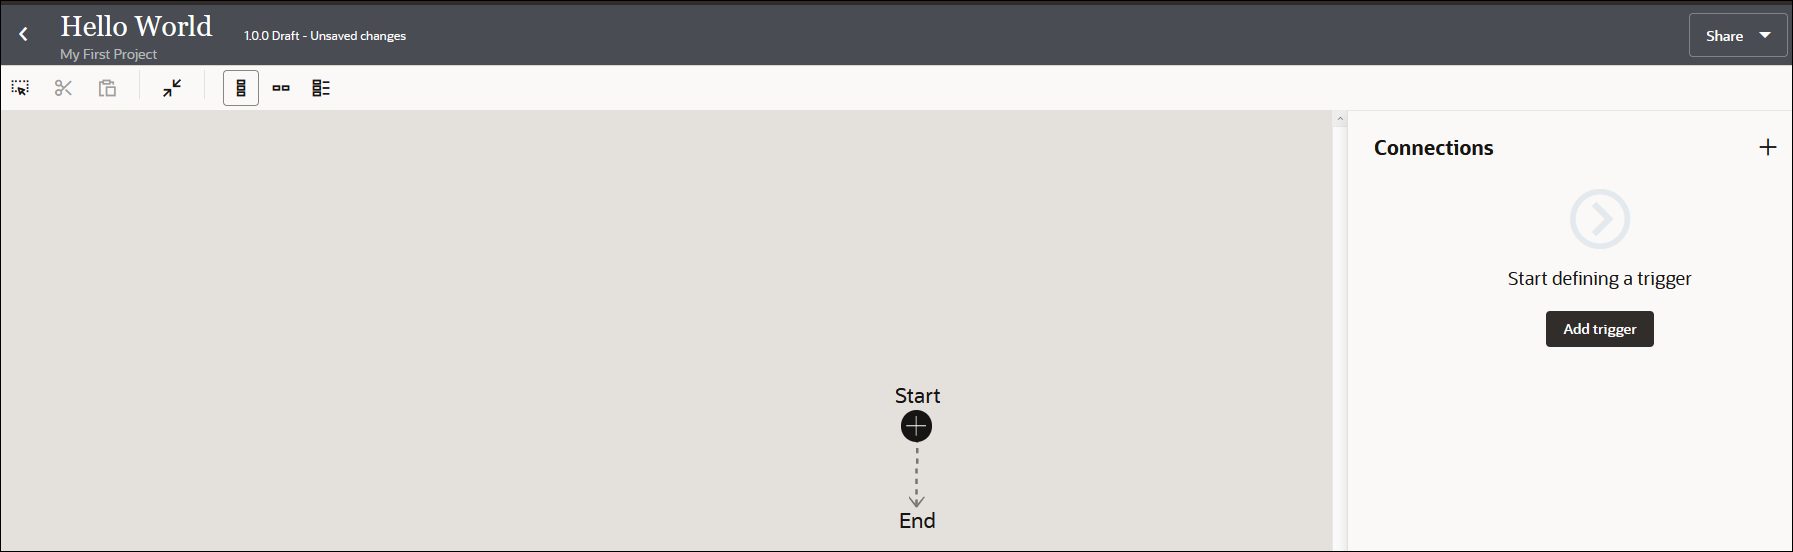 The Hello World integration canvas shows seven icons below the title. To the far right is the Share list. Start and End icons appear in the middle of the canvas. To the right is the Connections section, which includes an Add trigger button.